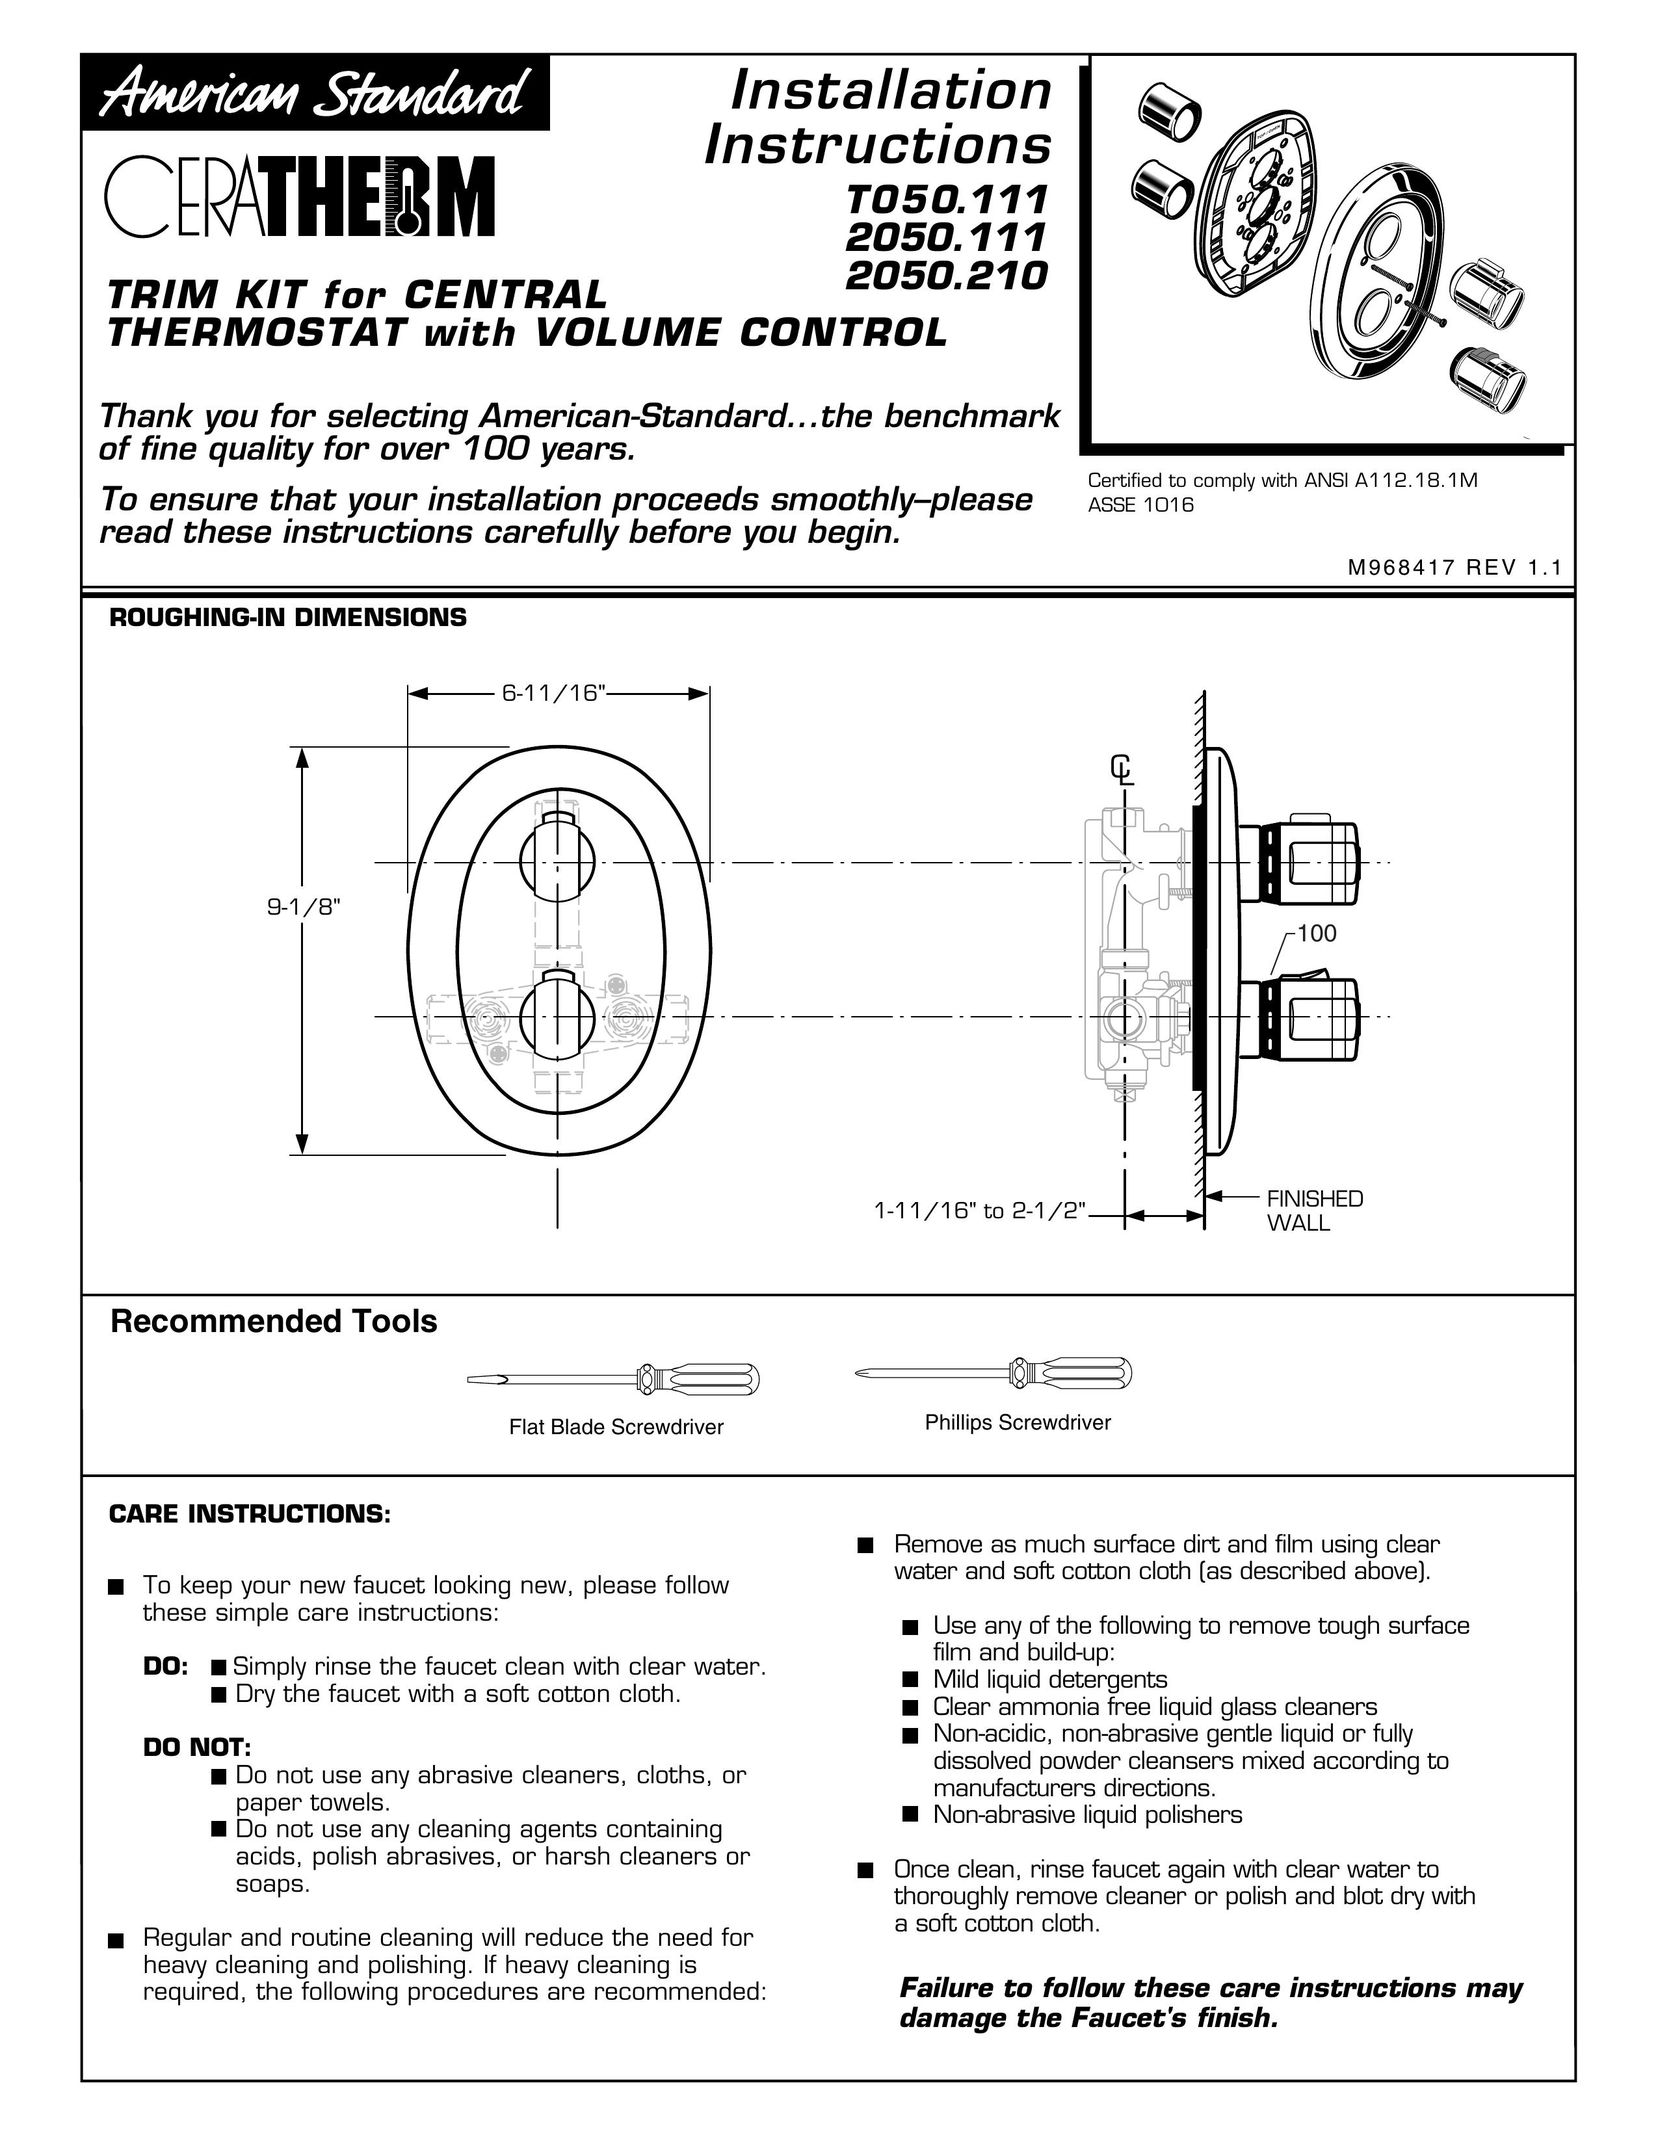 American Standard T050.111 Thermostat User Manual